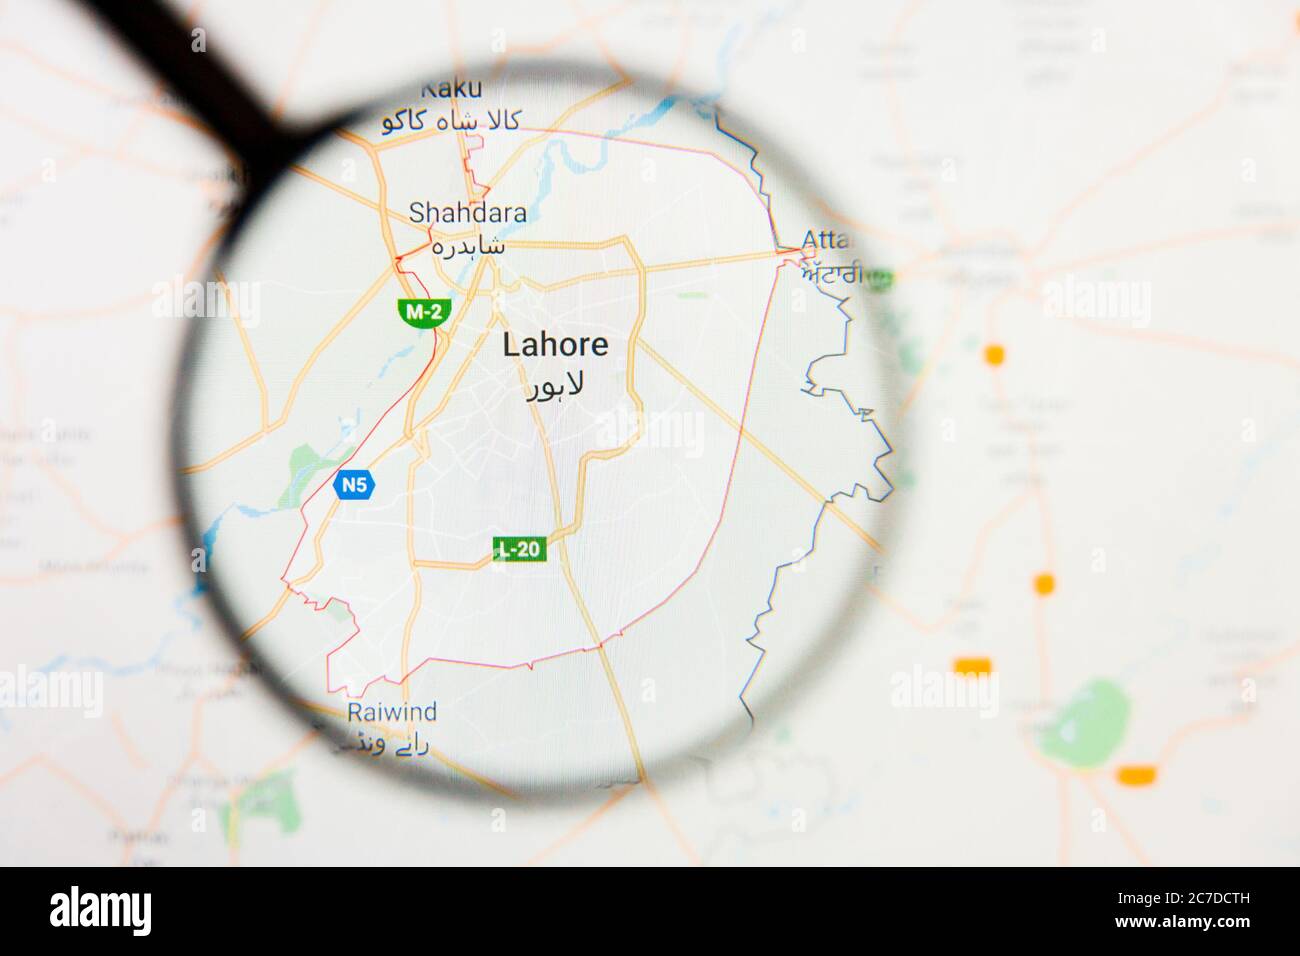 Lahore, Pakistan city visualization illustrative concept on display screen through magnifying glass Stock Photo